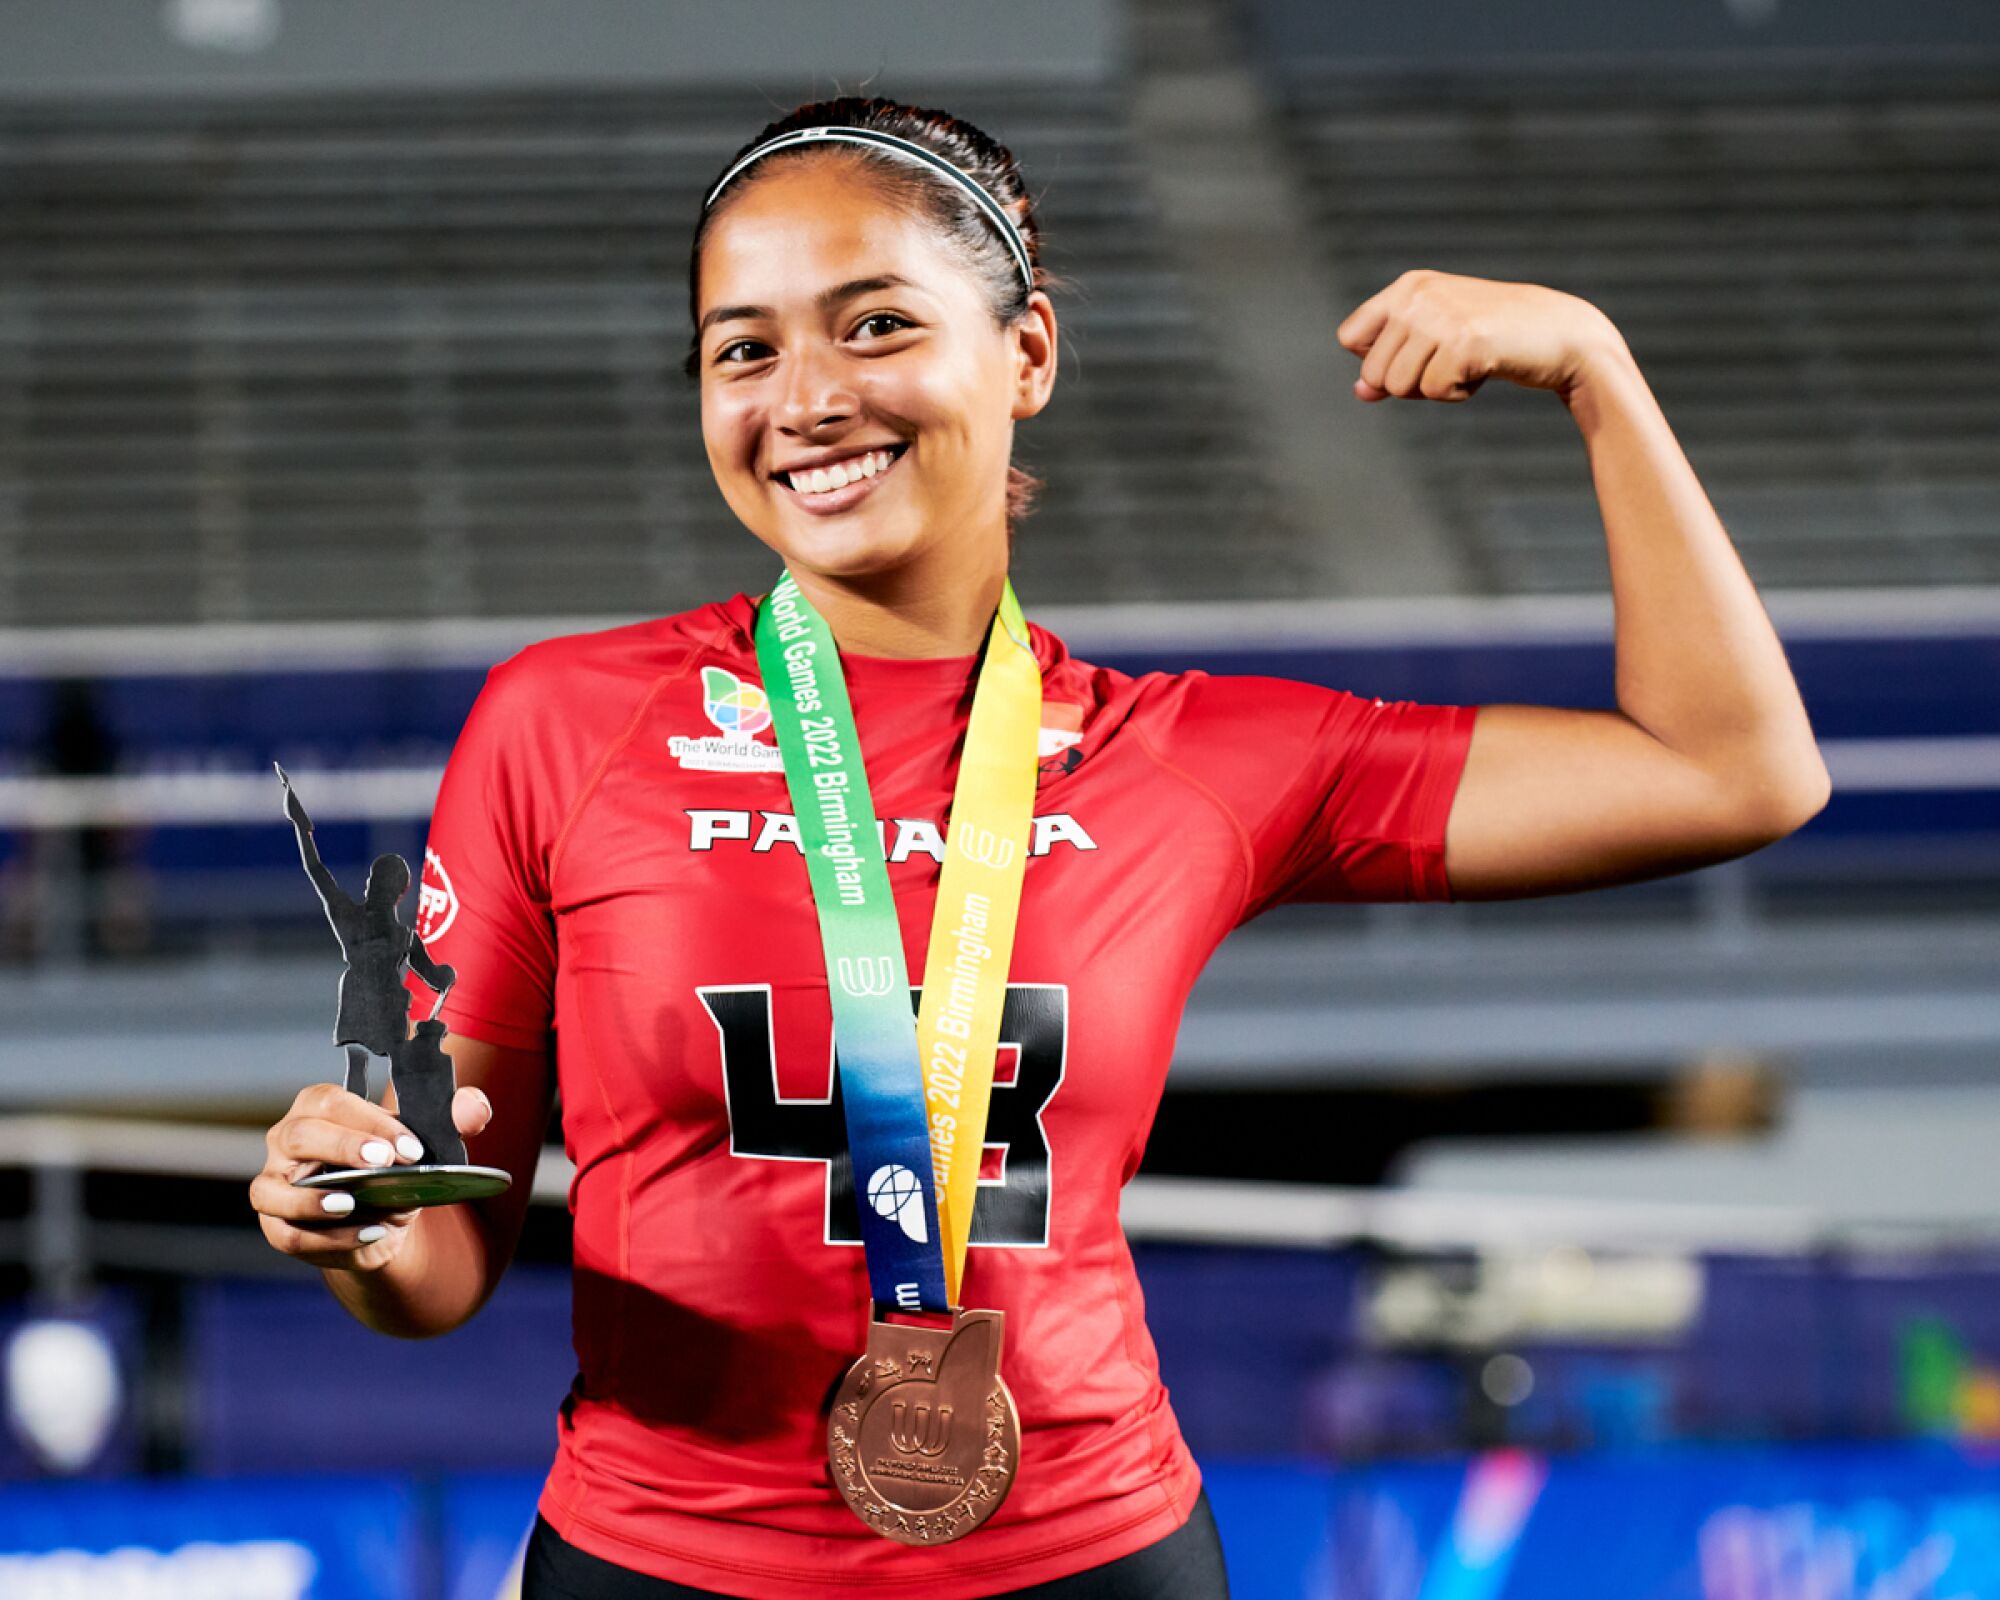 Andrea Castillo celebrates after helping Panama win a bronze medal in flag football at the 2022 World Games.